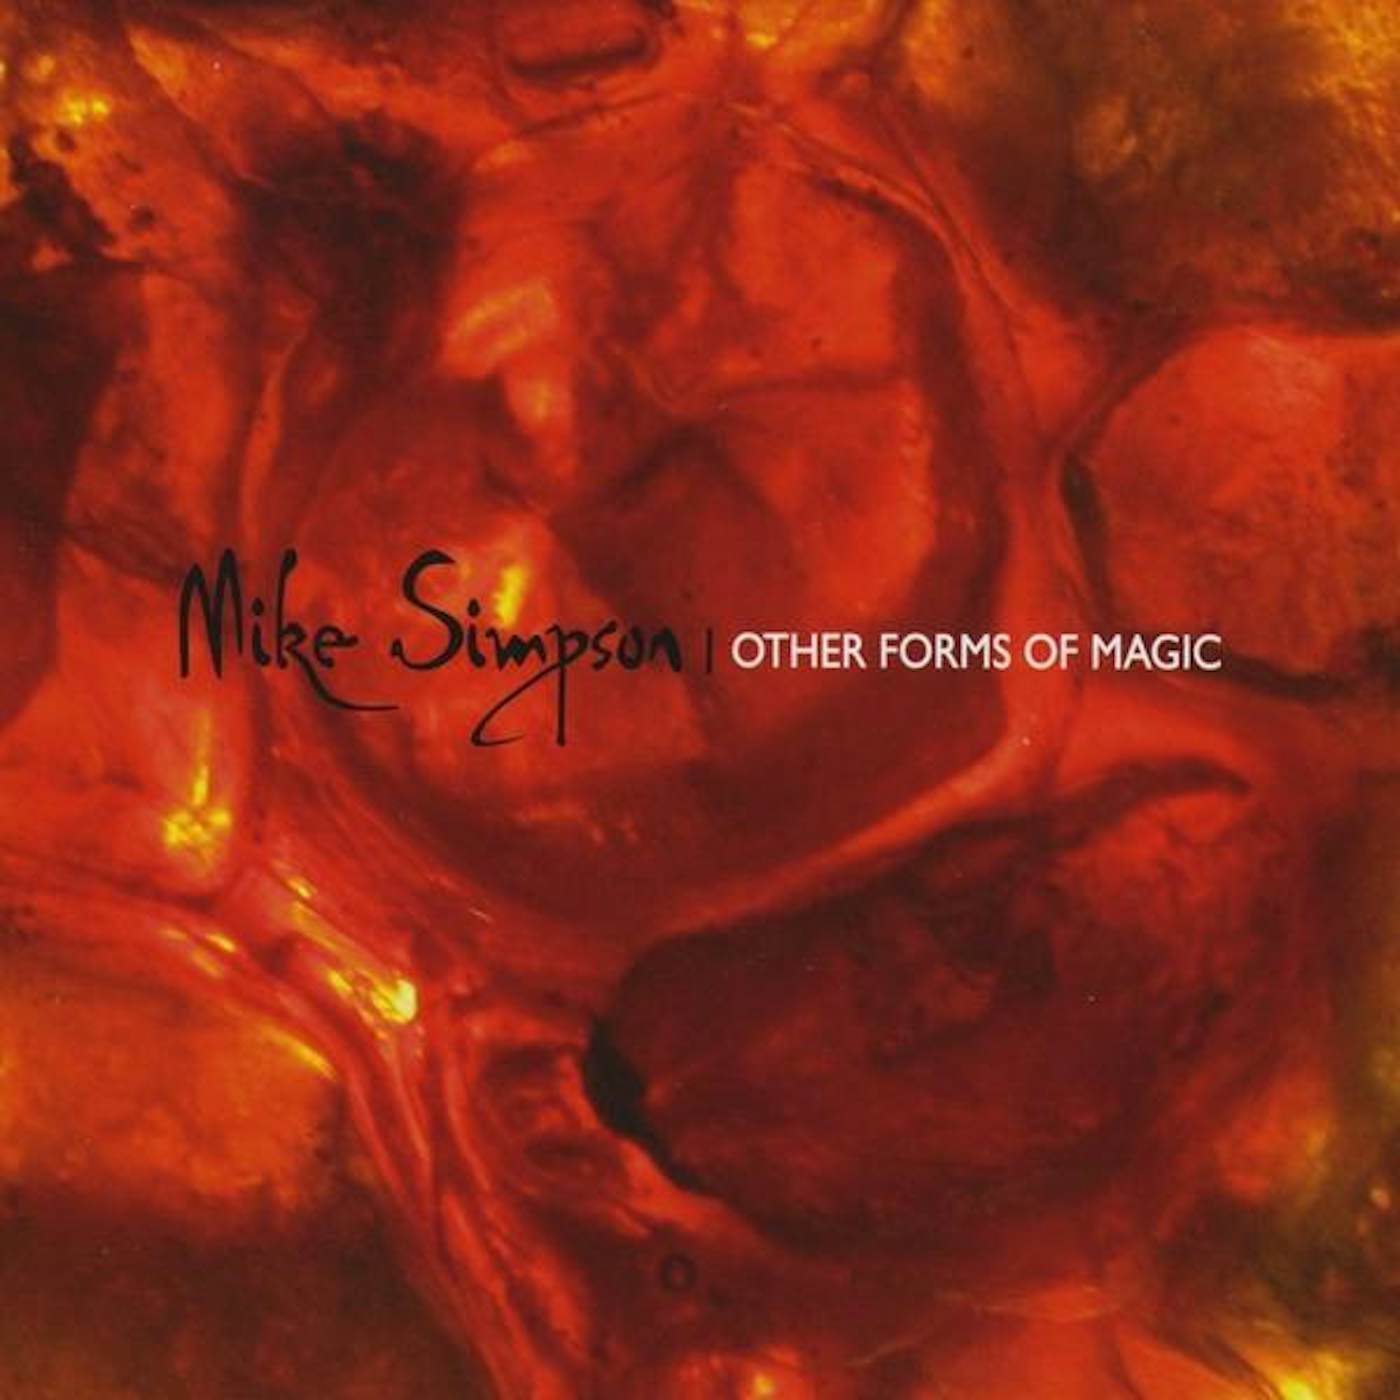 Mike Simpson OTHER FORMS OF MAGIC CD